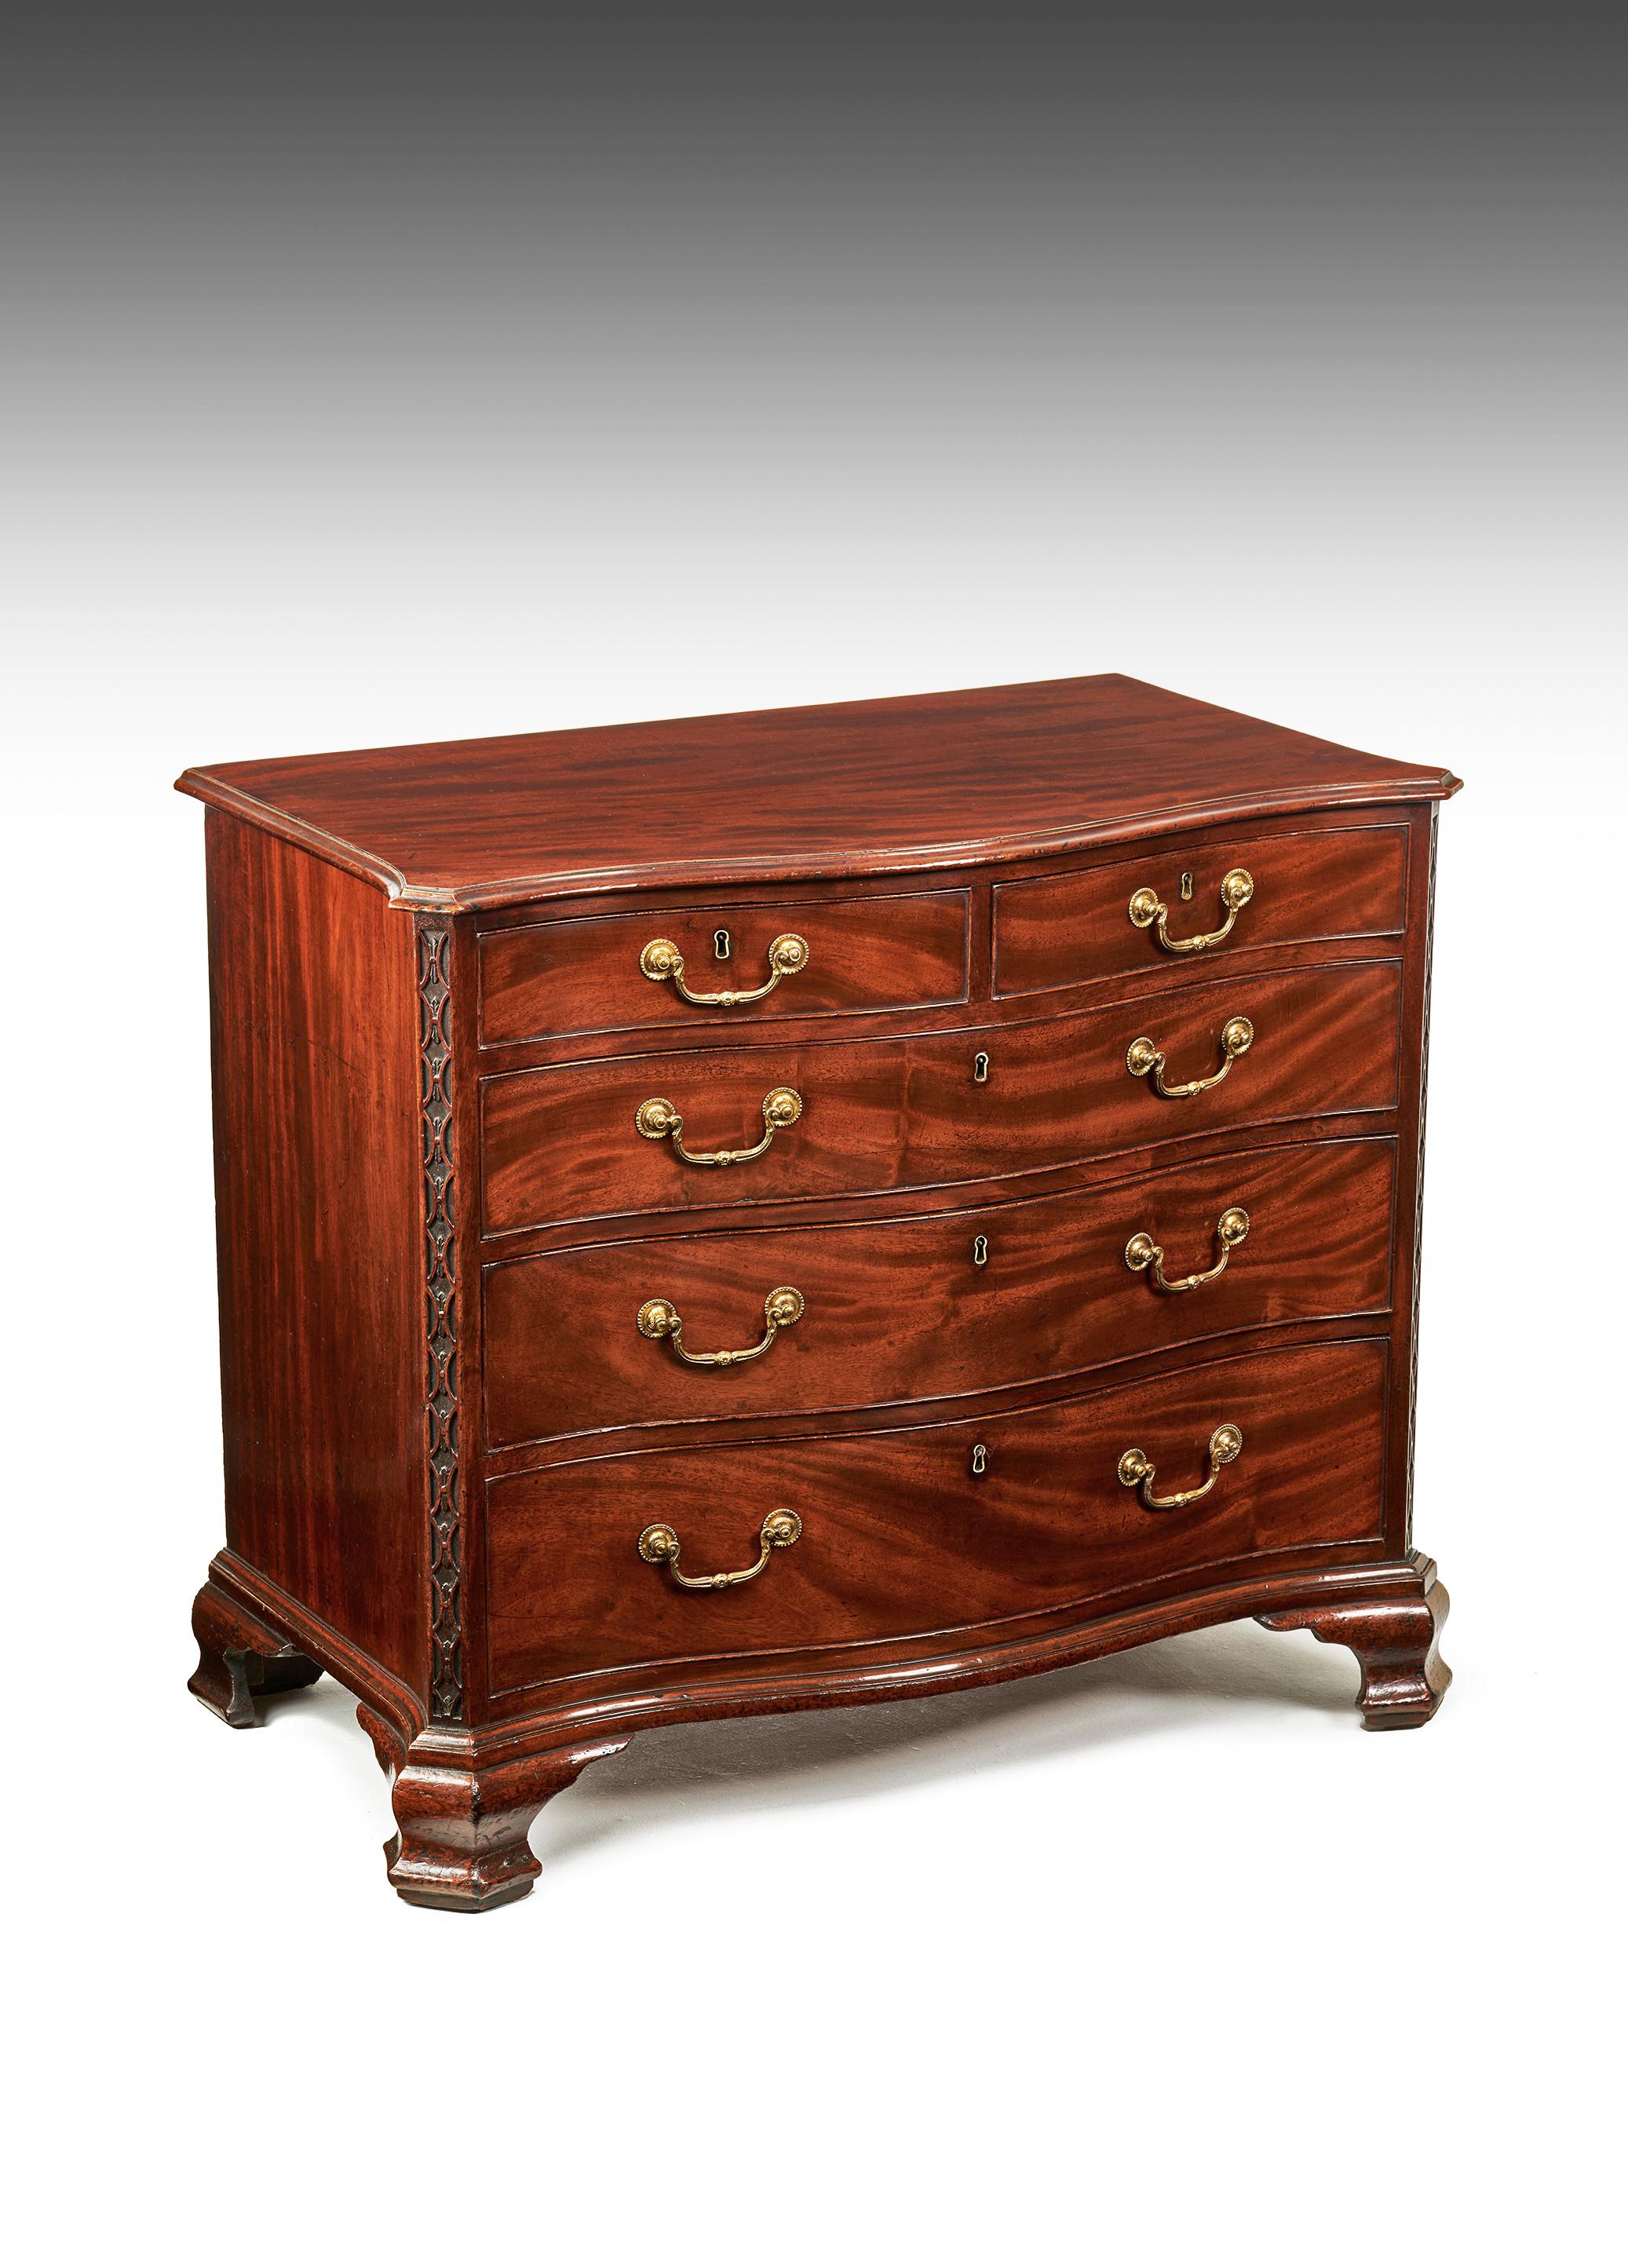 Fine antique Chippendale period 18th century serpentine mahogany chest of drawers of excellent proportions, retaining its original OG bracket feet and ornate gilt brass handles.

English, circa 1760-1970, George III.

Of a very desirable size